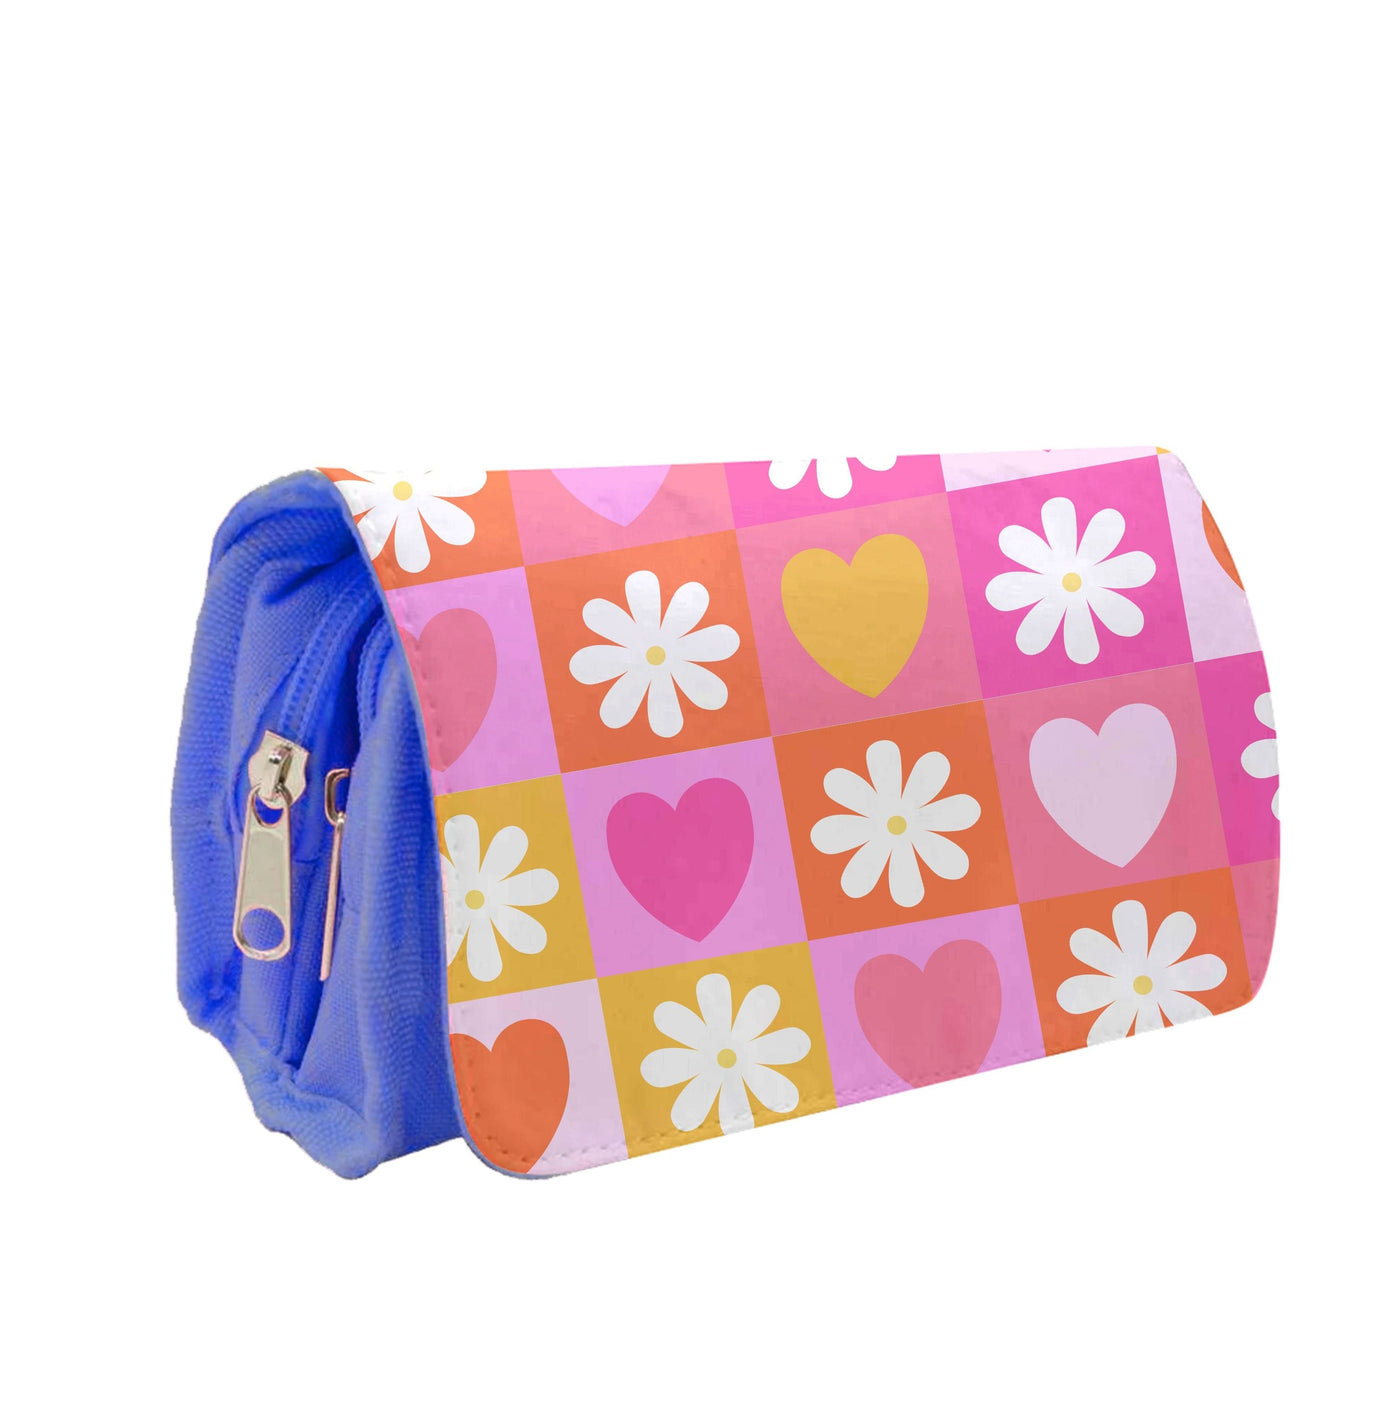 Checked Hearts And Flowers - Spring Patterns Pencil Case